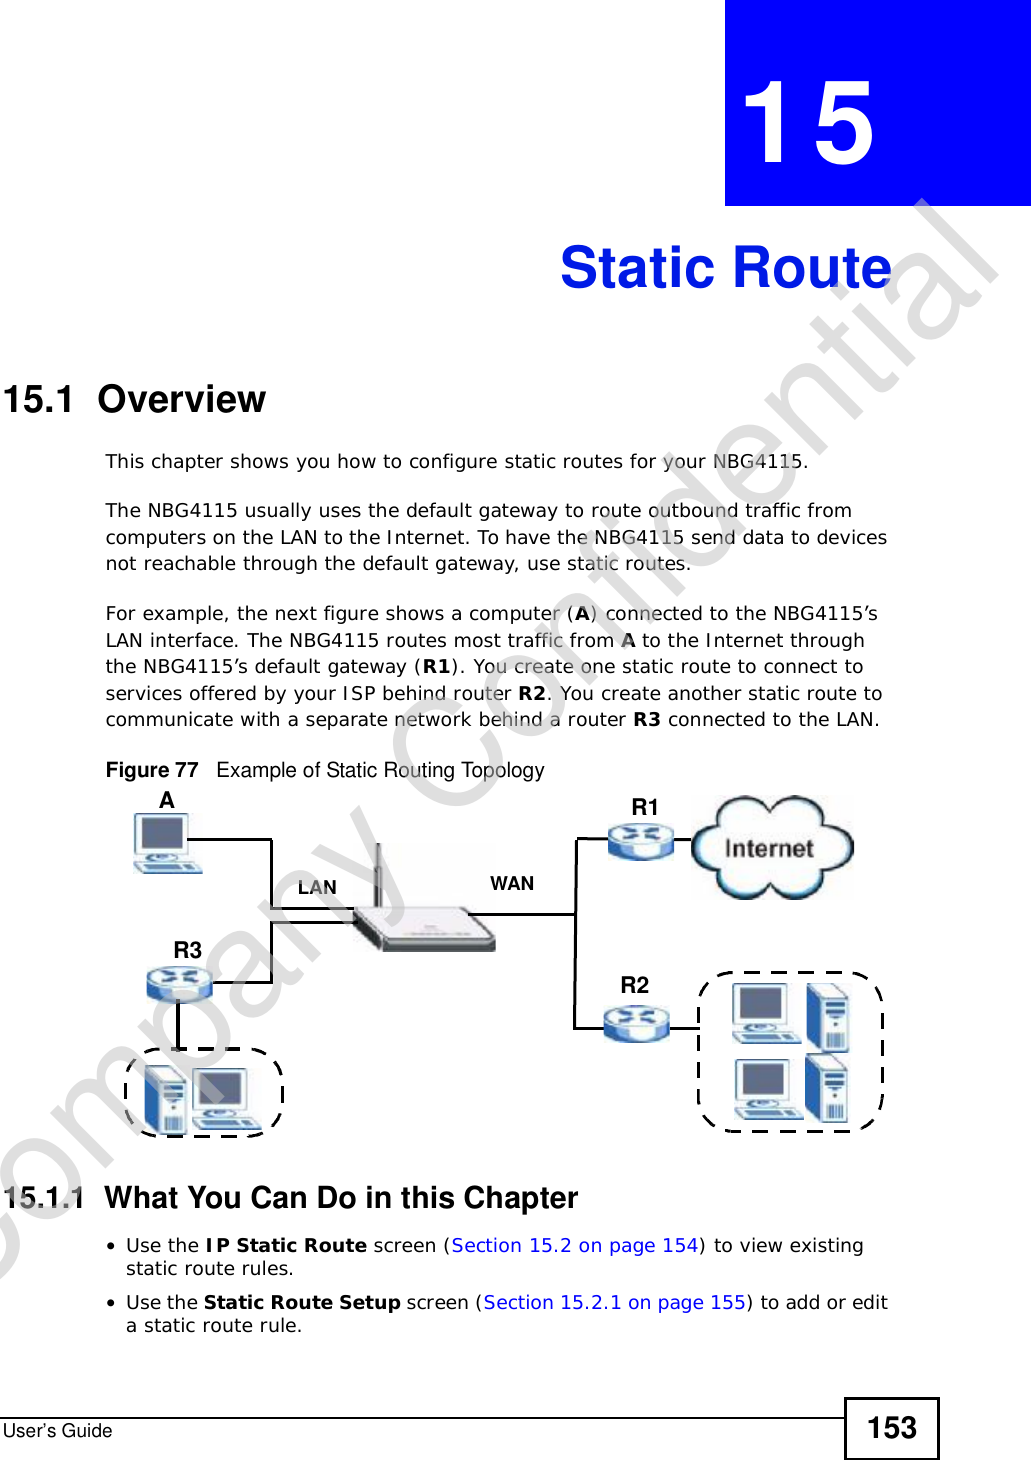 User’s Guide 153CHAPTER 15Static Route15.1  OverviewThis chapter shows you how to configure static routes for your NBG4115.The NBG4115 usually uses the default gateway to route outbound traffic from computers on the LAN to the Internet. To have the NBG4115 send data to devices not reachable through the default gateway, use static routes.For example, the next figure shows a computer (A) connected to the NBG4115’s LAN interface. The NBG4115 routes most traffic from Ato the Internet through the NBG4115’s default gateway (R1). You create one static route to connect to services offered by your ISP behind router R2. You create another static route to communicate with a separate network behind a router R3 connected to the LAN.Figure 77   Example of Static Routing Topology15.1.1  What You Can Do in this Chapter•Use the IP Static Route screen (Section 15.2 on page 154) to view existing static route rules.•Use the Static Route Setup screen (Section 15.2.1 on page 155) to add or edit a static route rule.WANR1R2AR3LANCompany Confidential